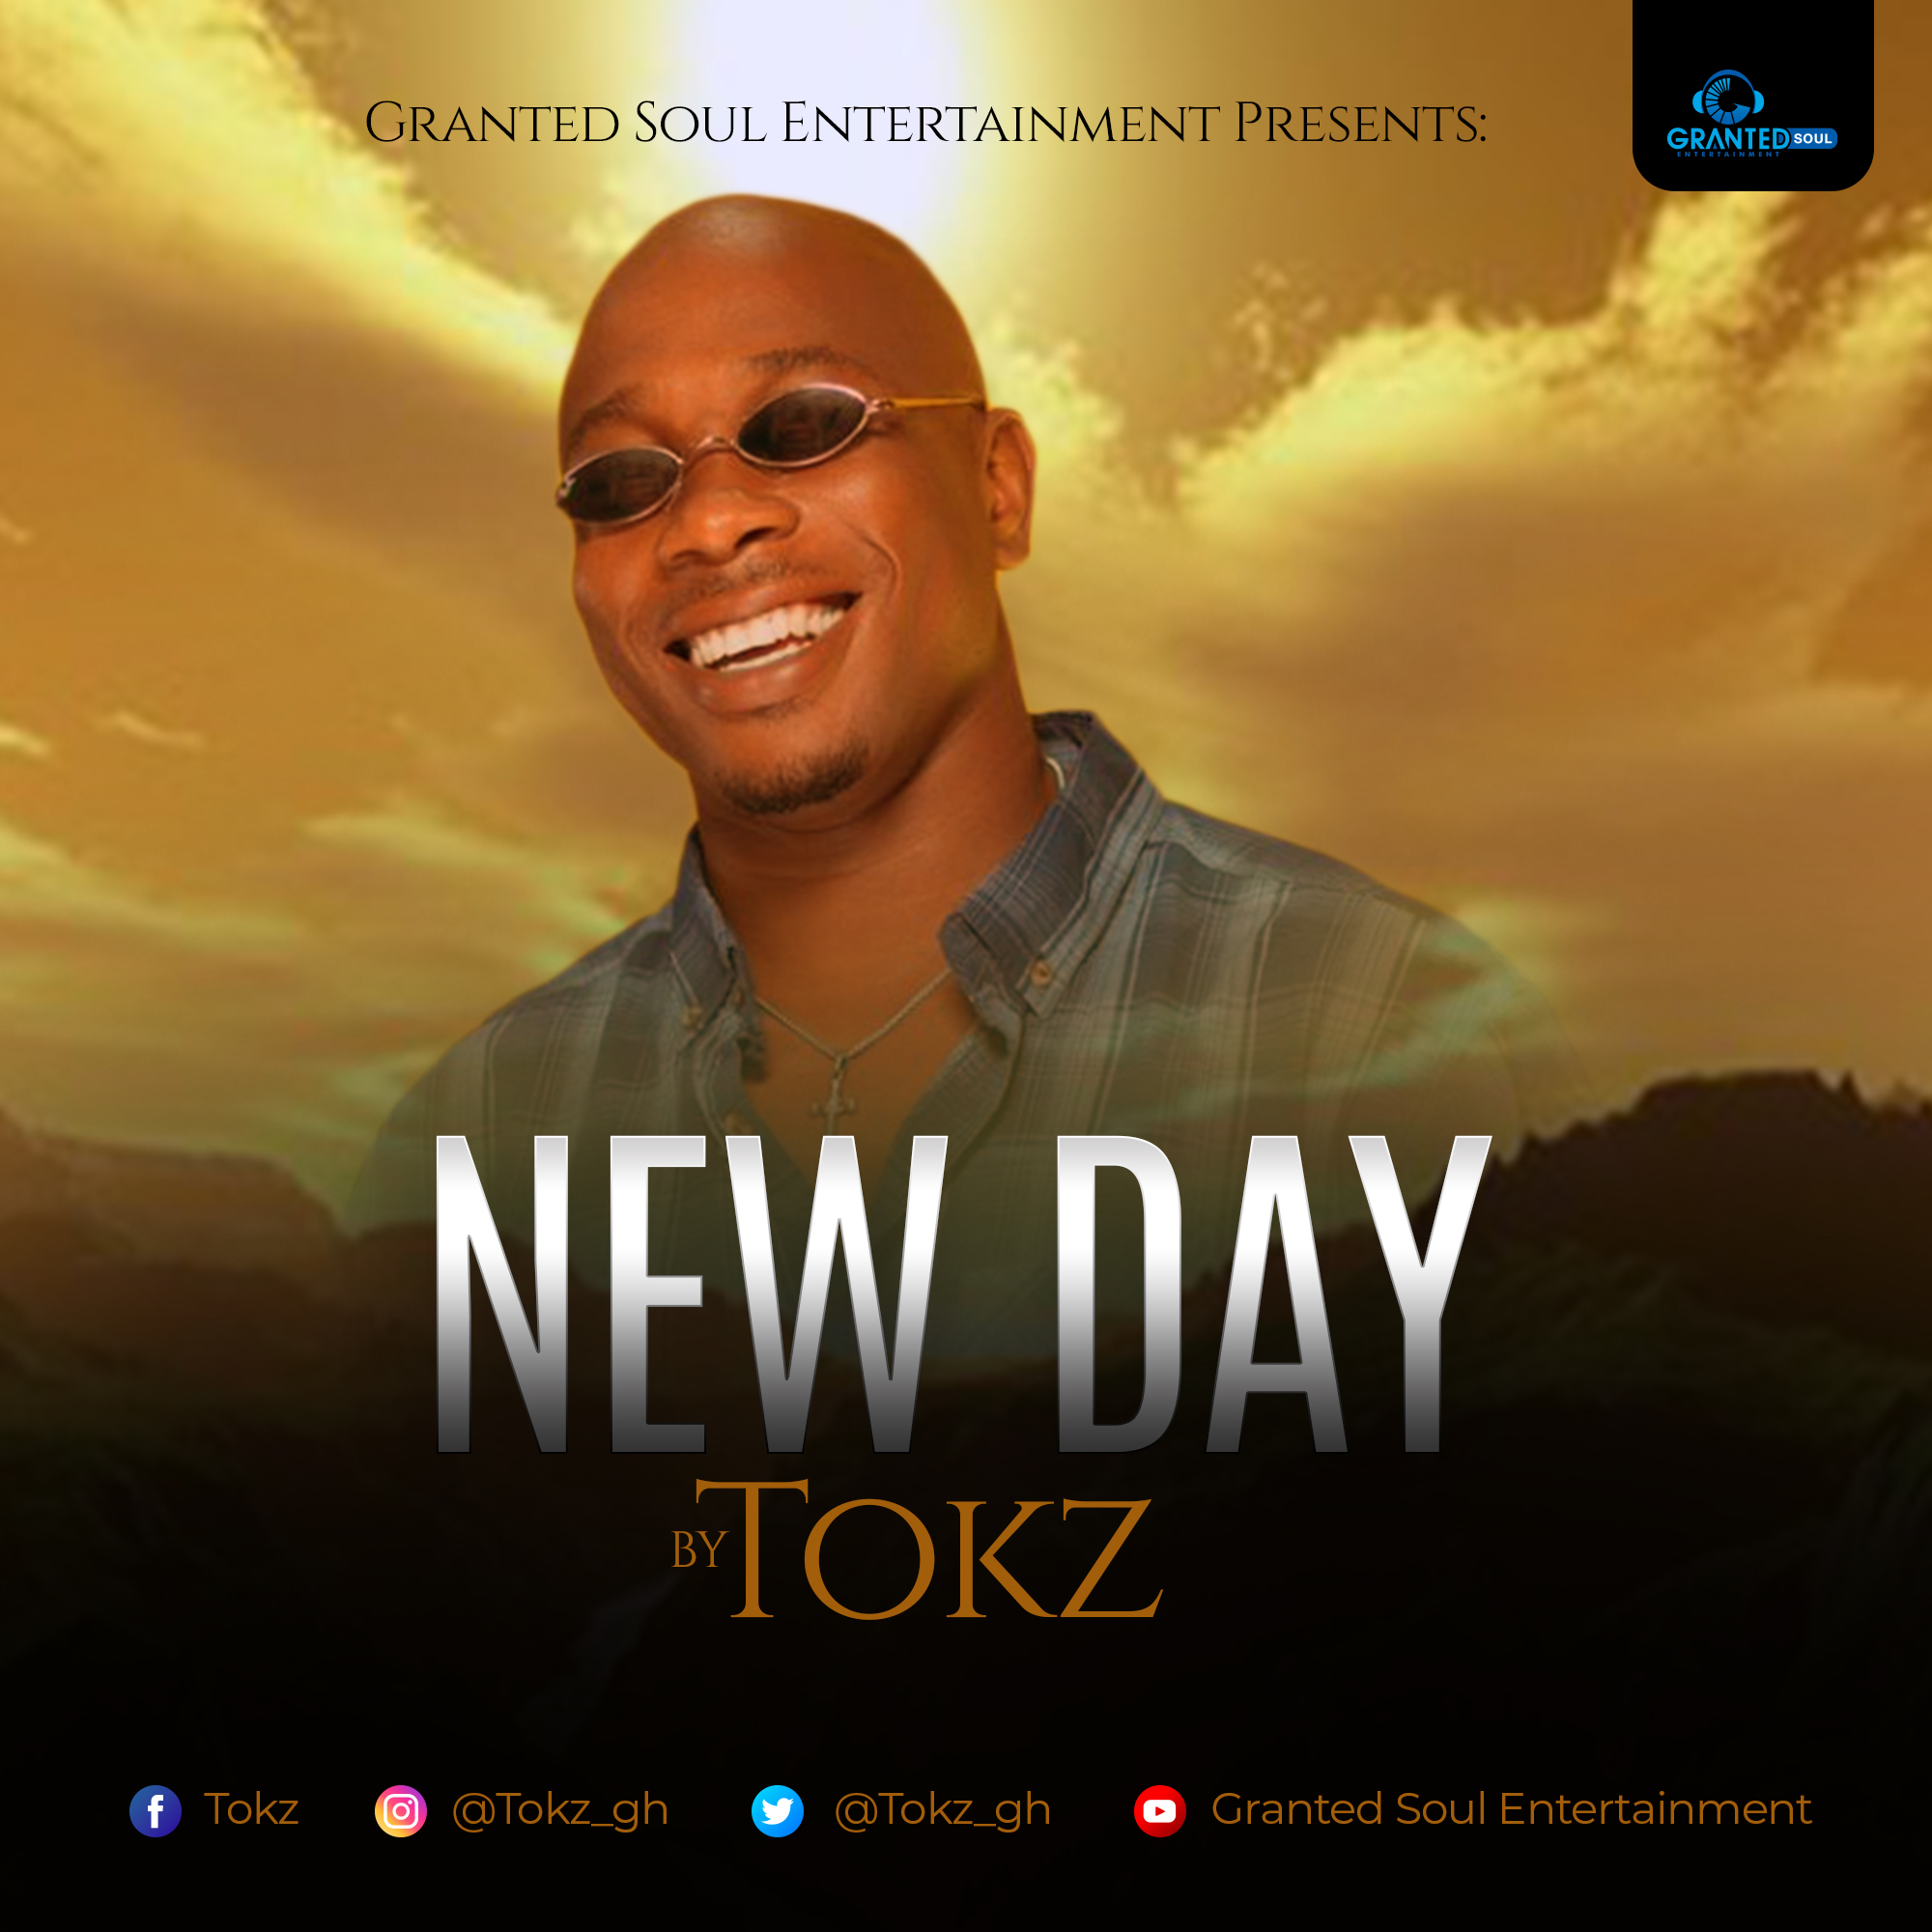 Tokz New Day EP Cover